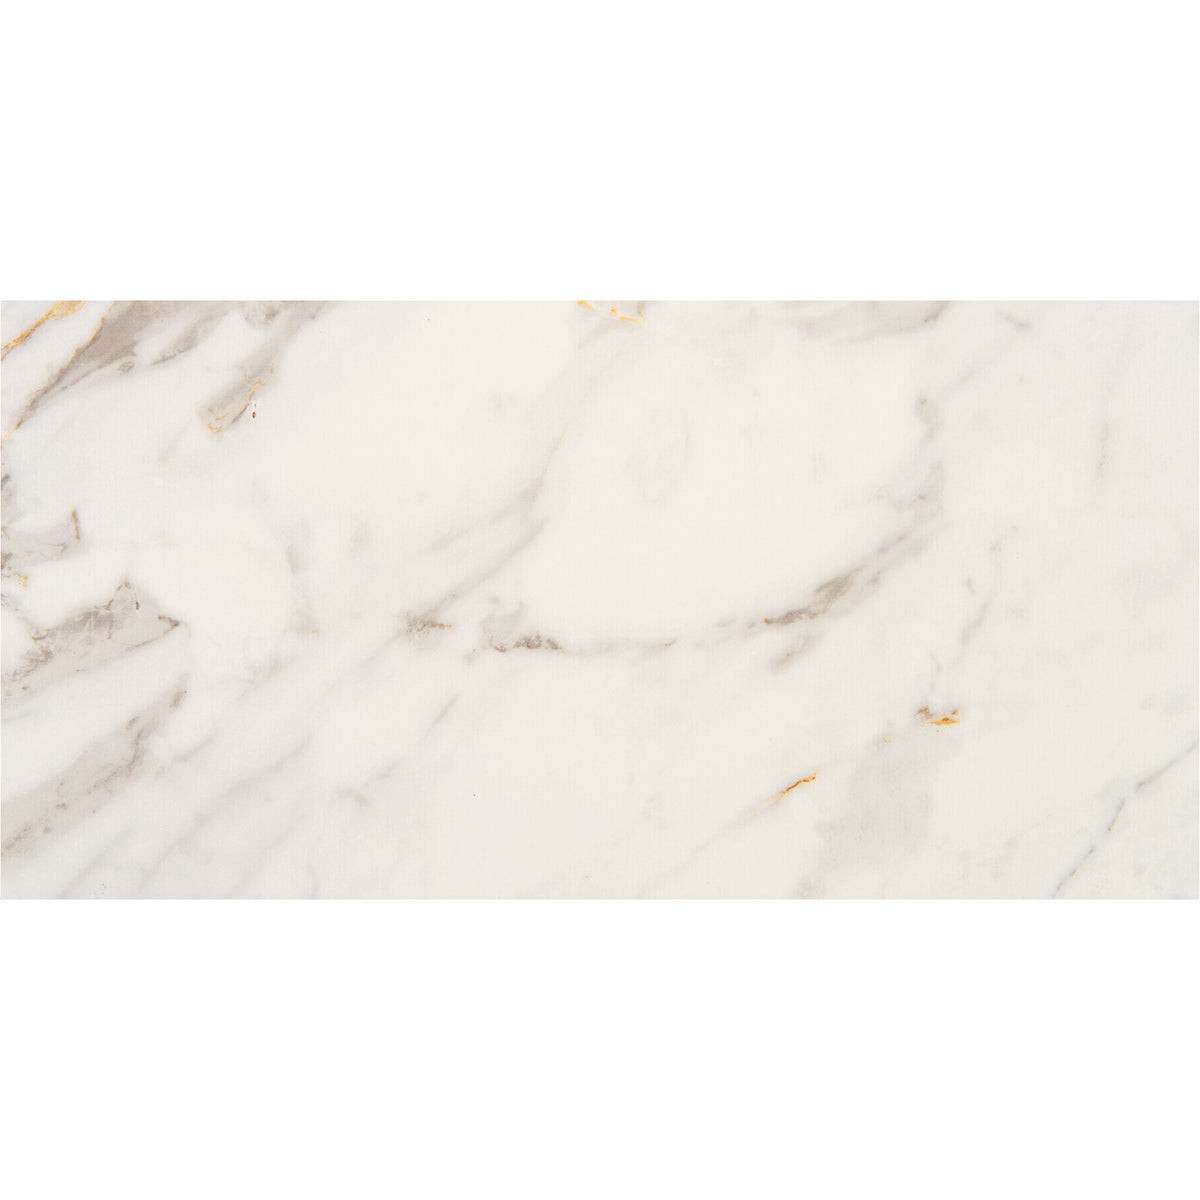 Marazzi - Marble Obsession - 12 in. x 24 in. Colorbody Porcelain Tile - Calacatta Gold Polished